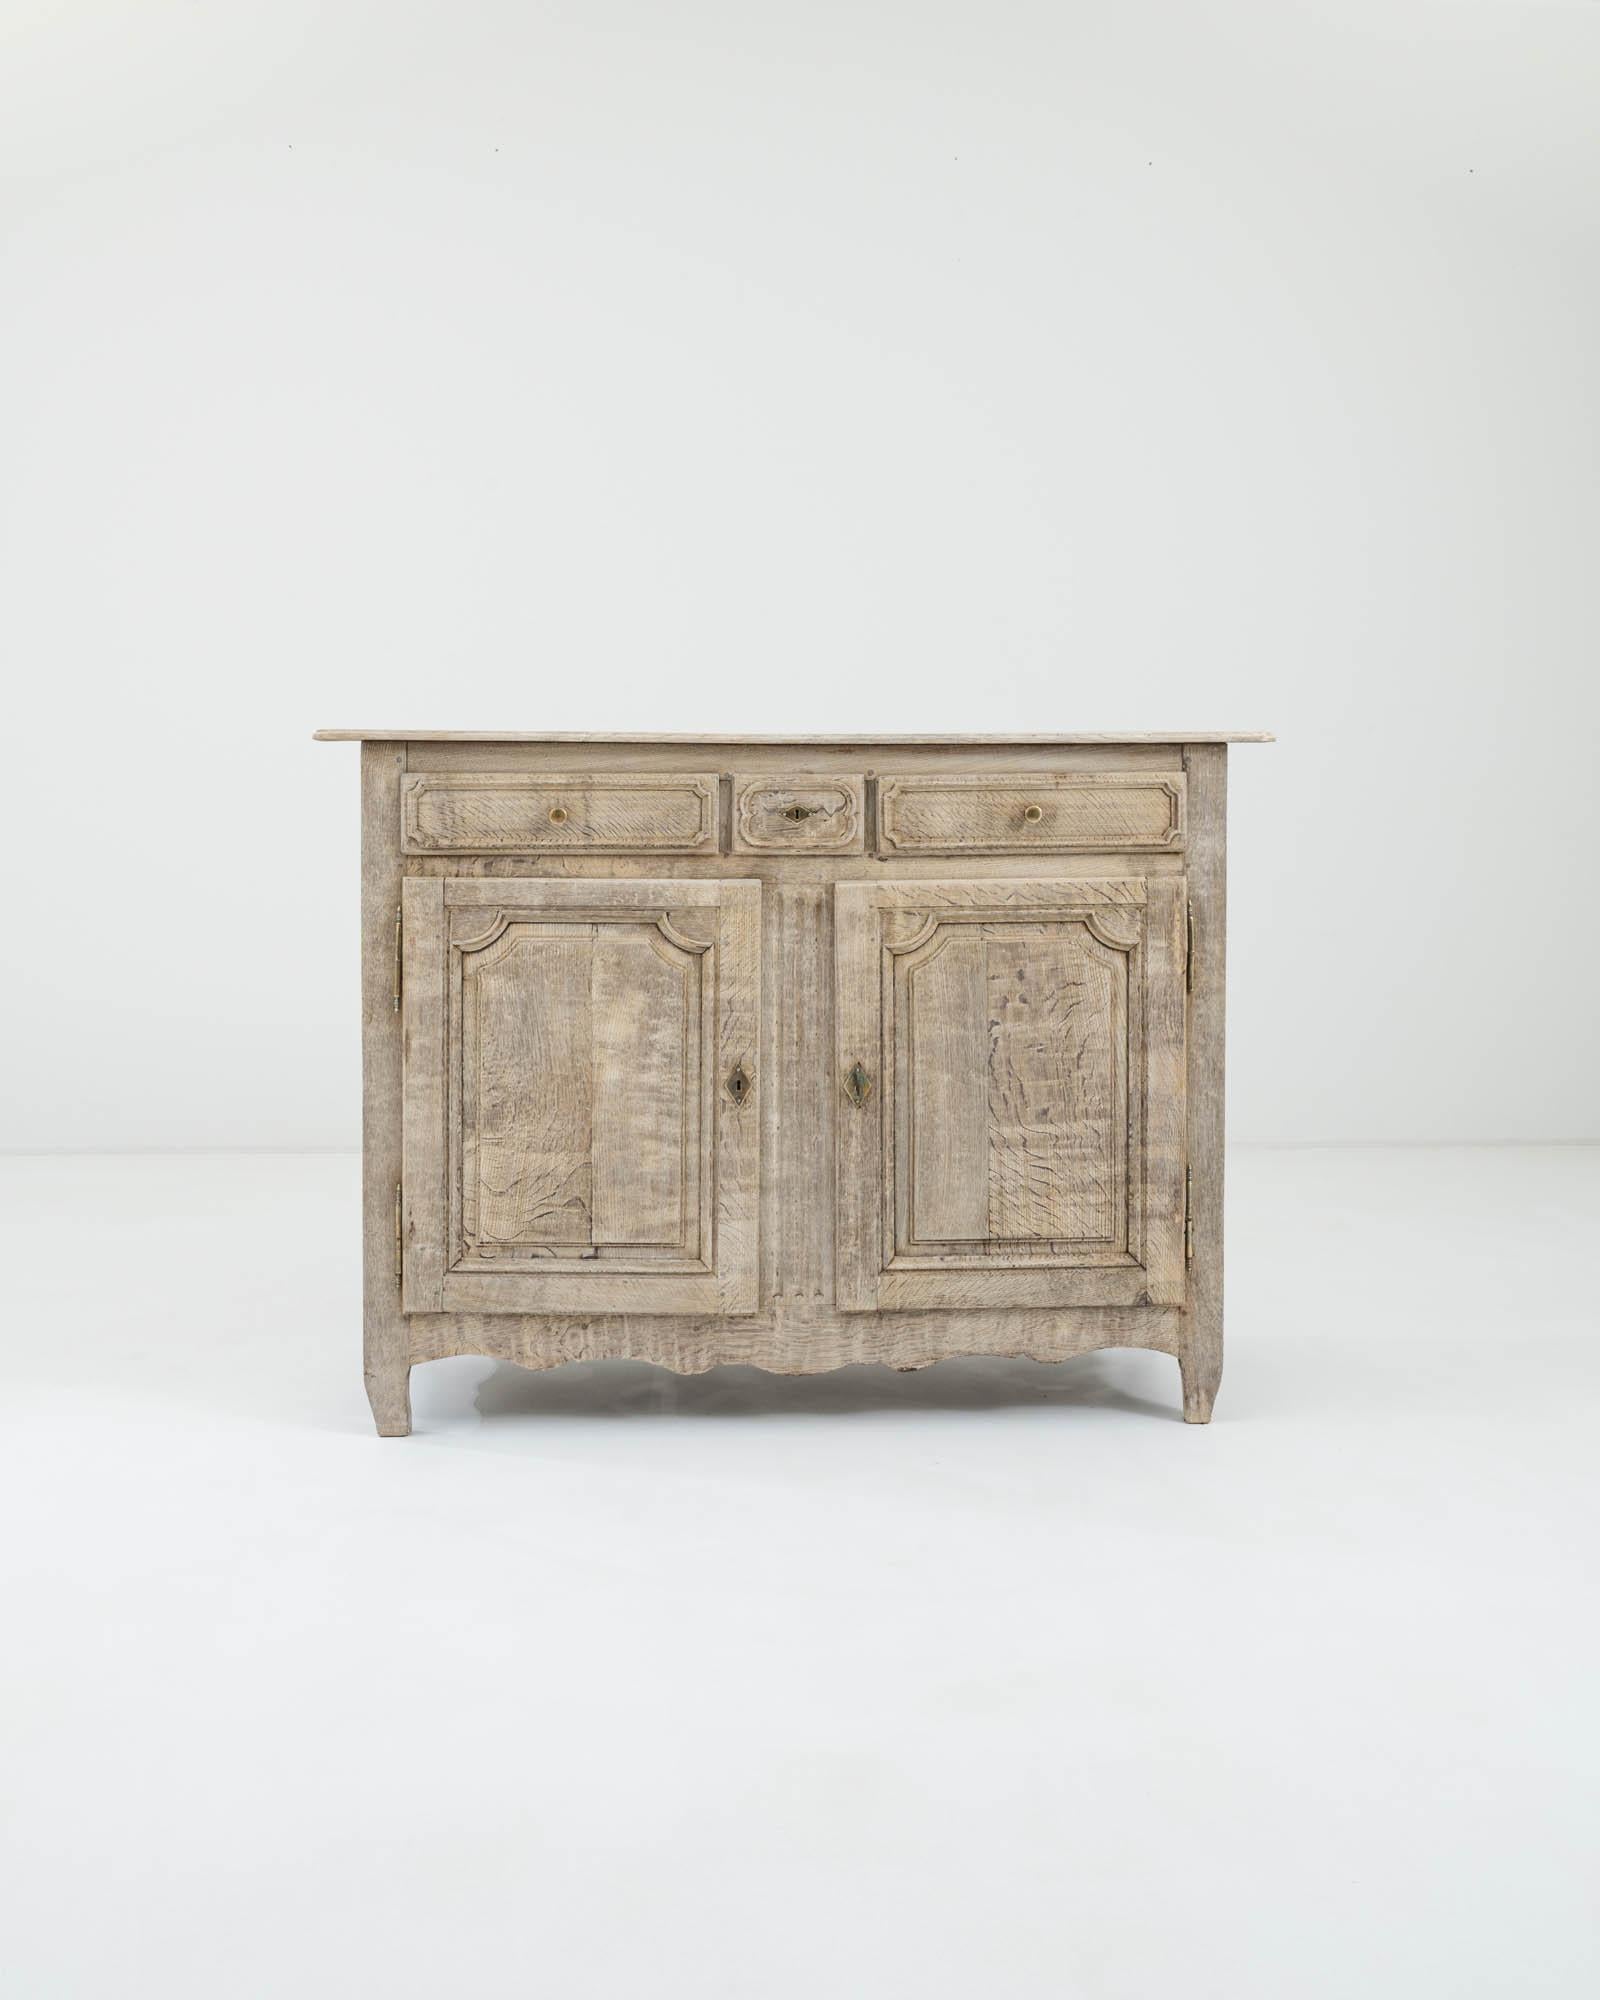 An oak buffet, hand-crafted in France during the 19th century. The blond tone of the bleached wood reveals a graceful rippling grain, punctuating masterfully carved details on the doors and a set of drawers sitting atop them. The slightly curved